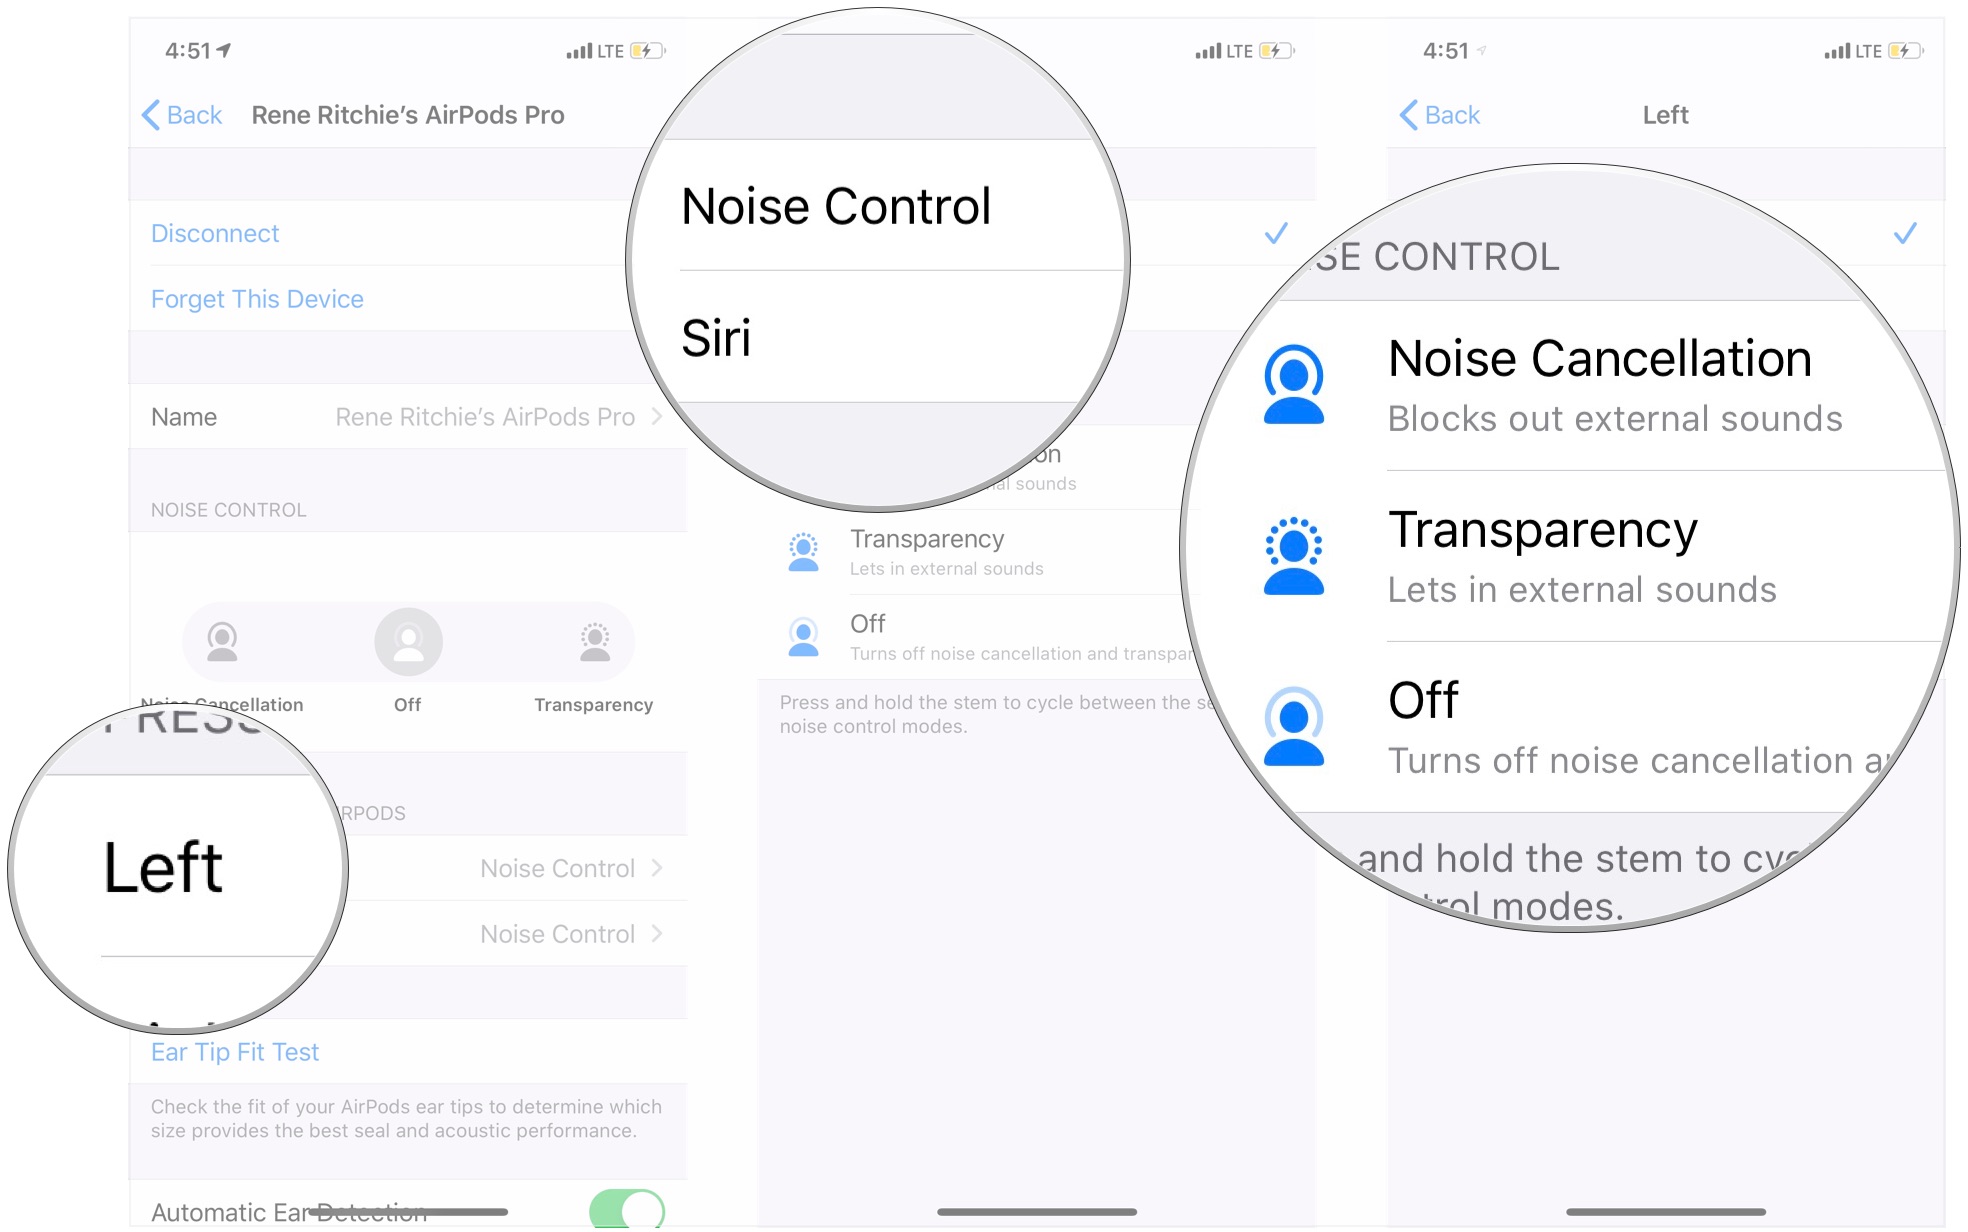 Tap Left, tap Noise Control or Siri, tap Noise Control options